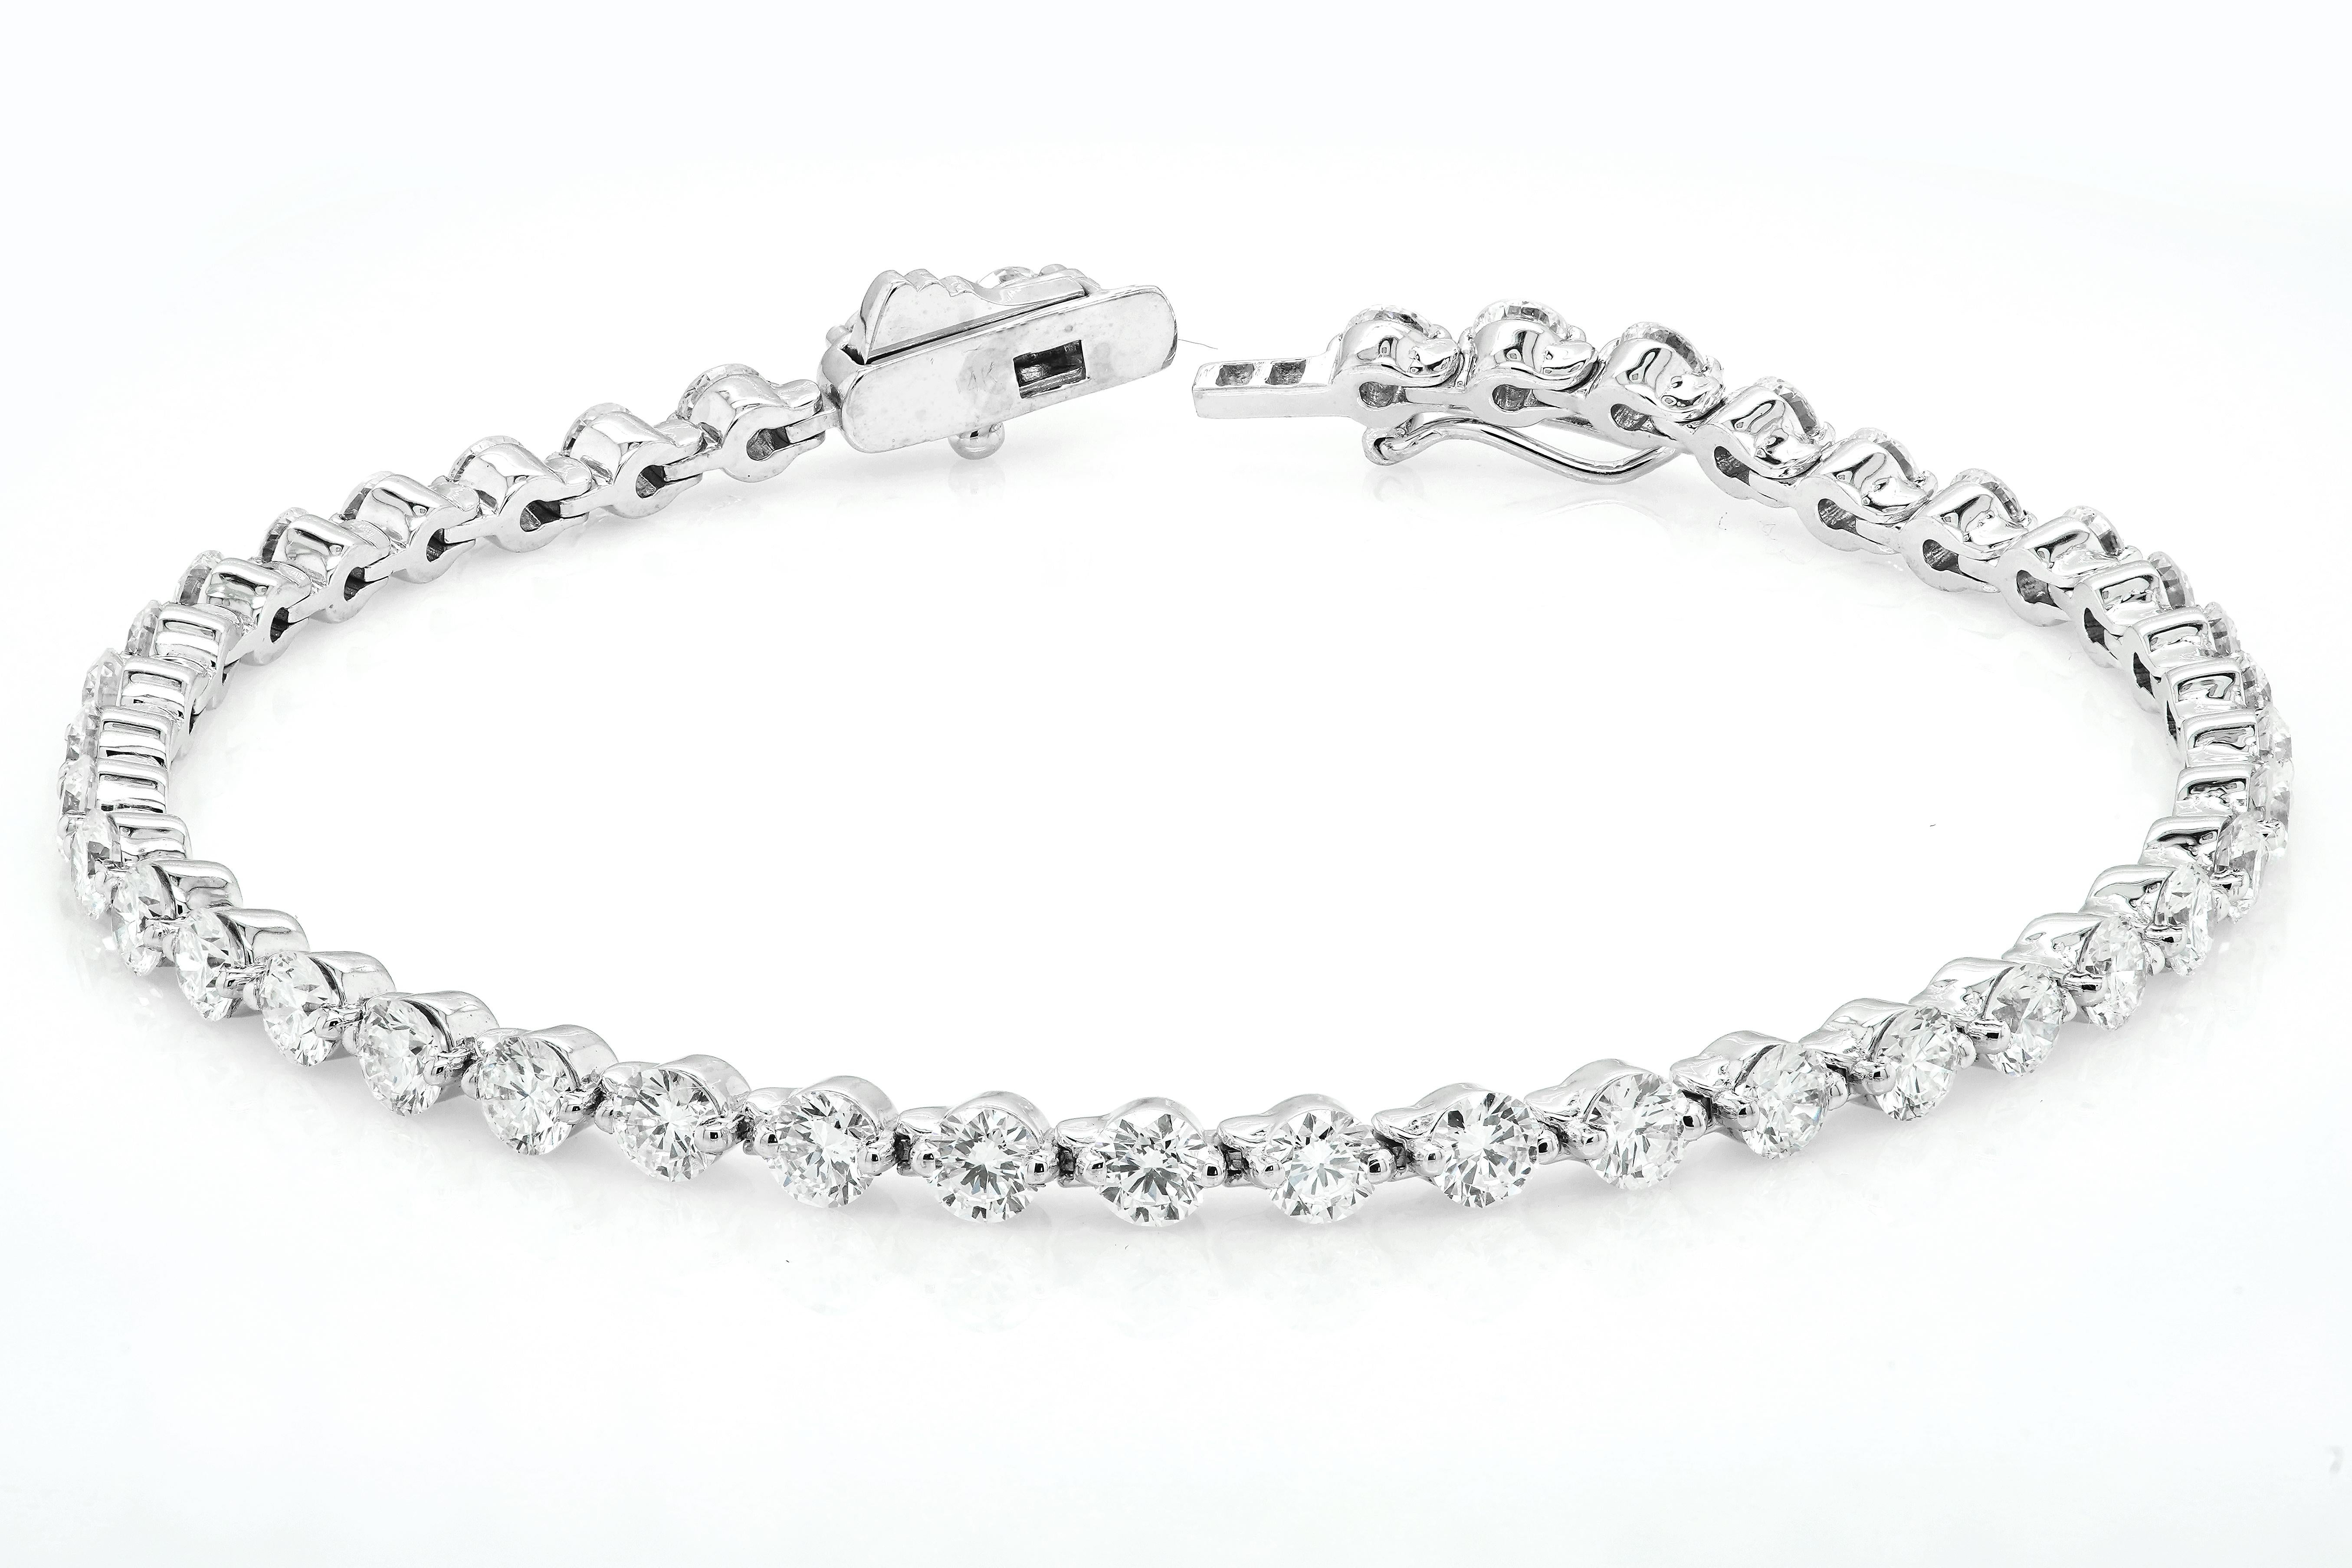 Diamond Tennis Bracelet consisting of 43 natural diamonds set in 14K White Gold 

3mm Round brilliant Cut Diamonds, 4.77 carats  - G-H Colour, SI Quality Grade 



*Free Delivery

